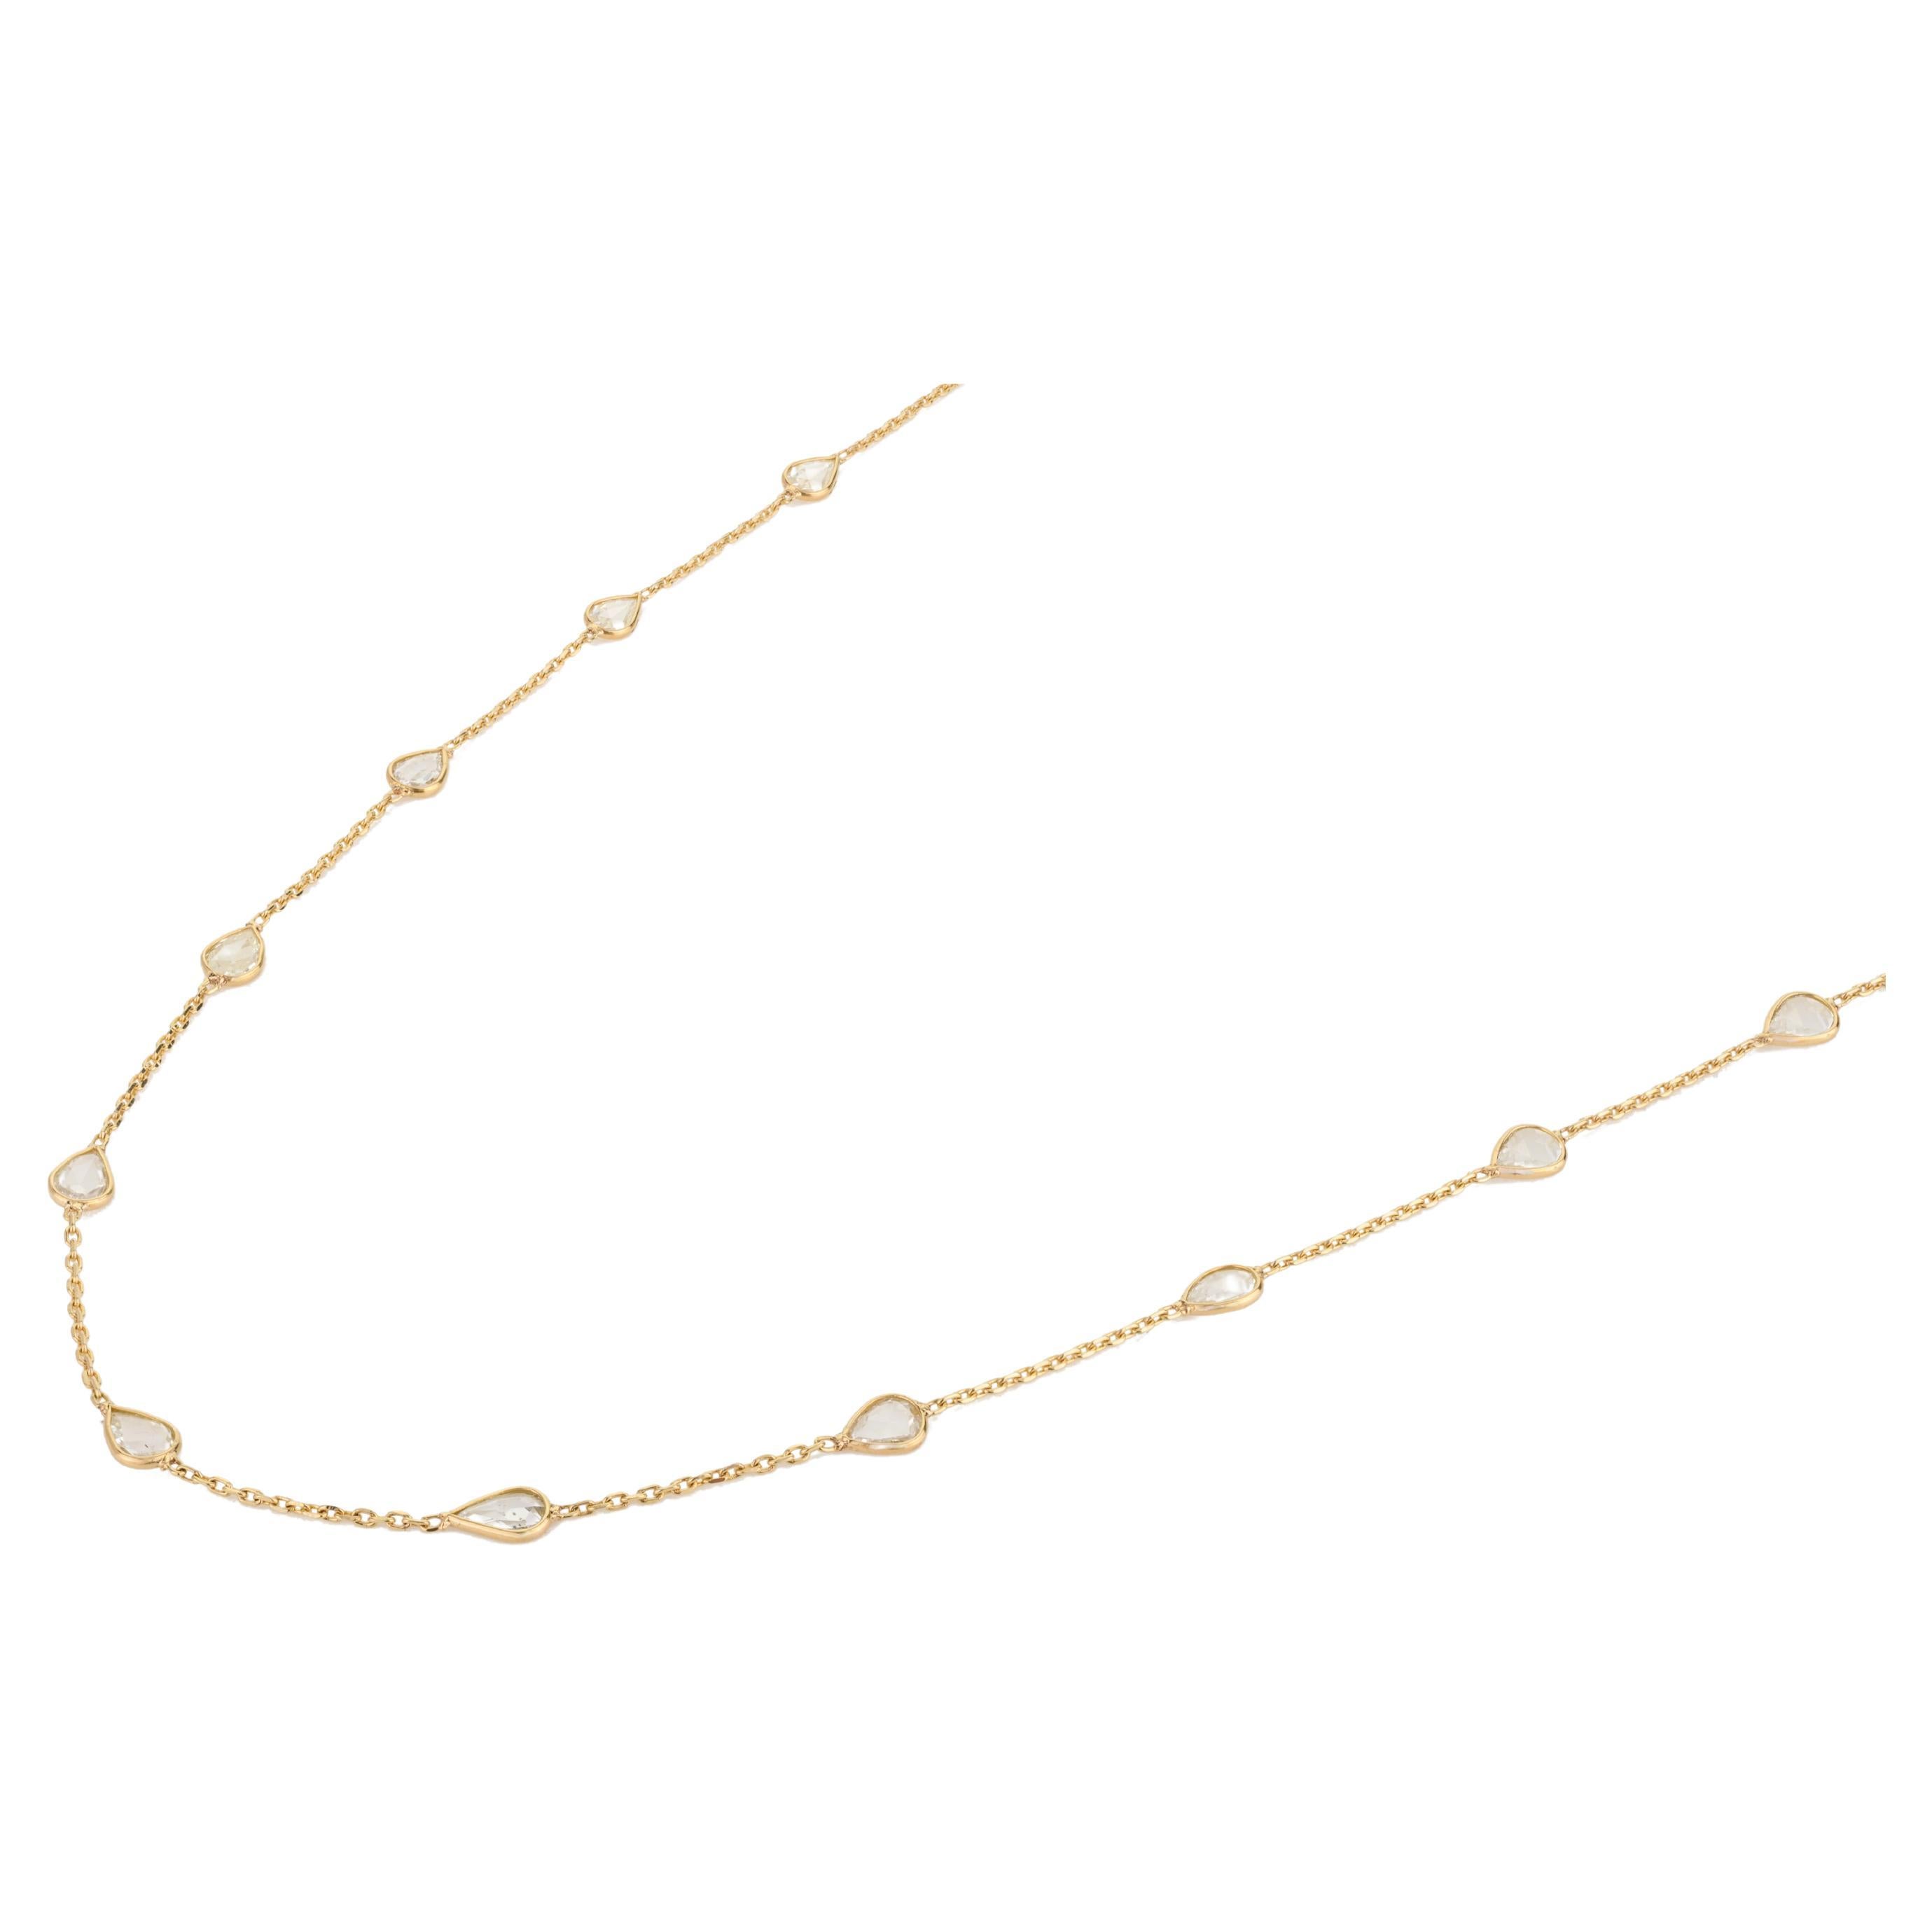 Natural Uncut Diamond Necklace Crafted in 18 Karat Solid Yellow Gold for Her For Sale